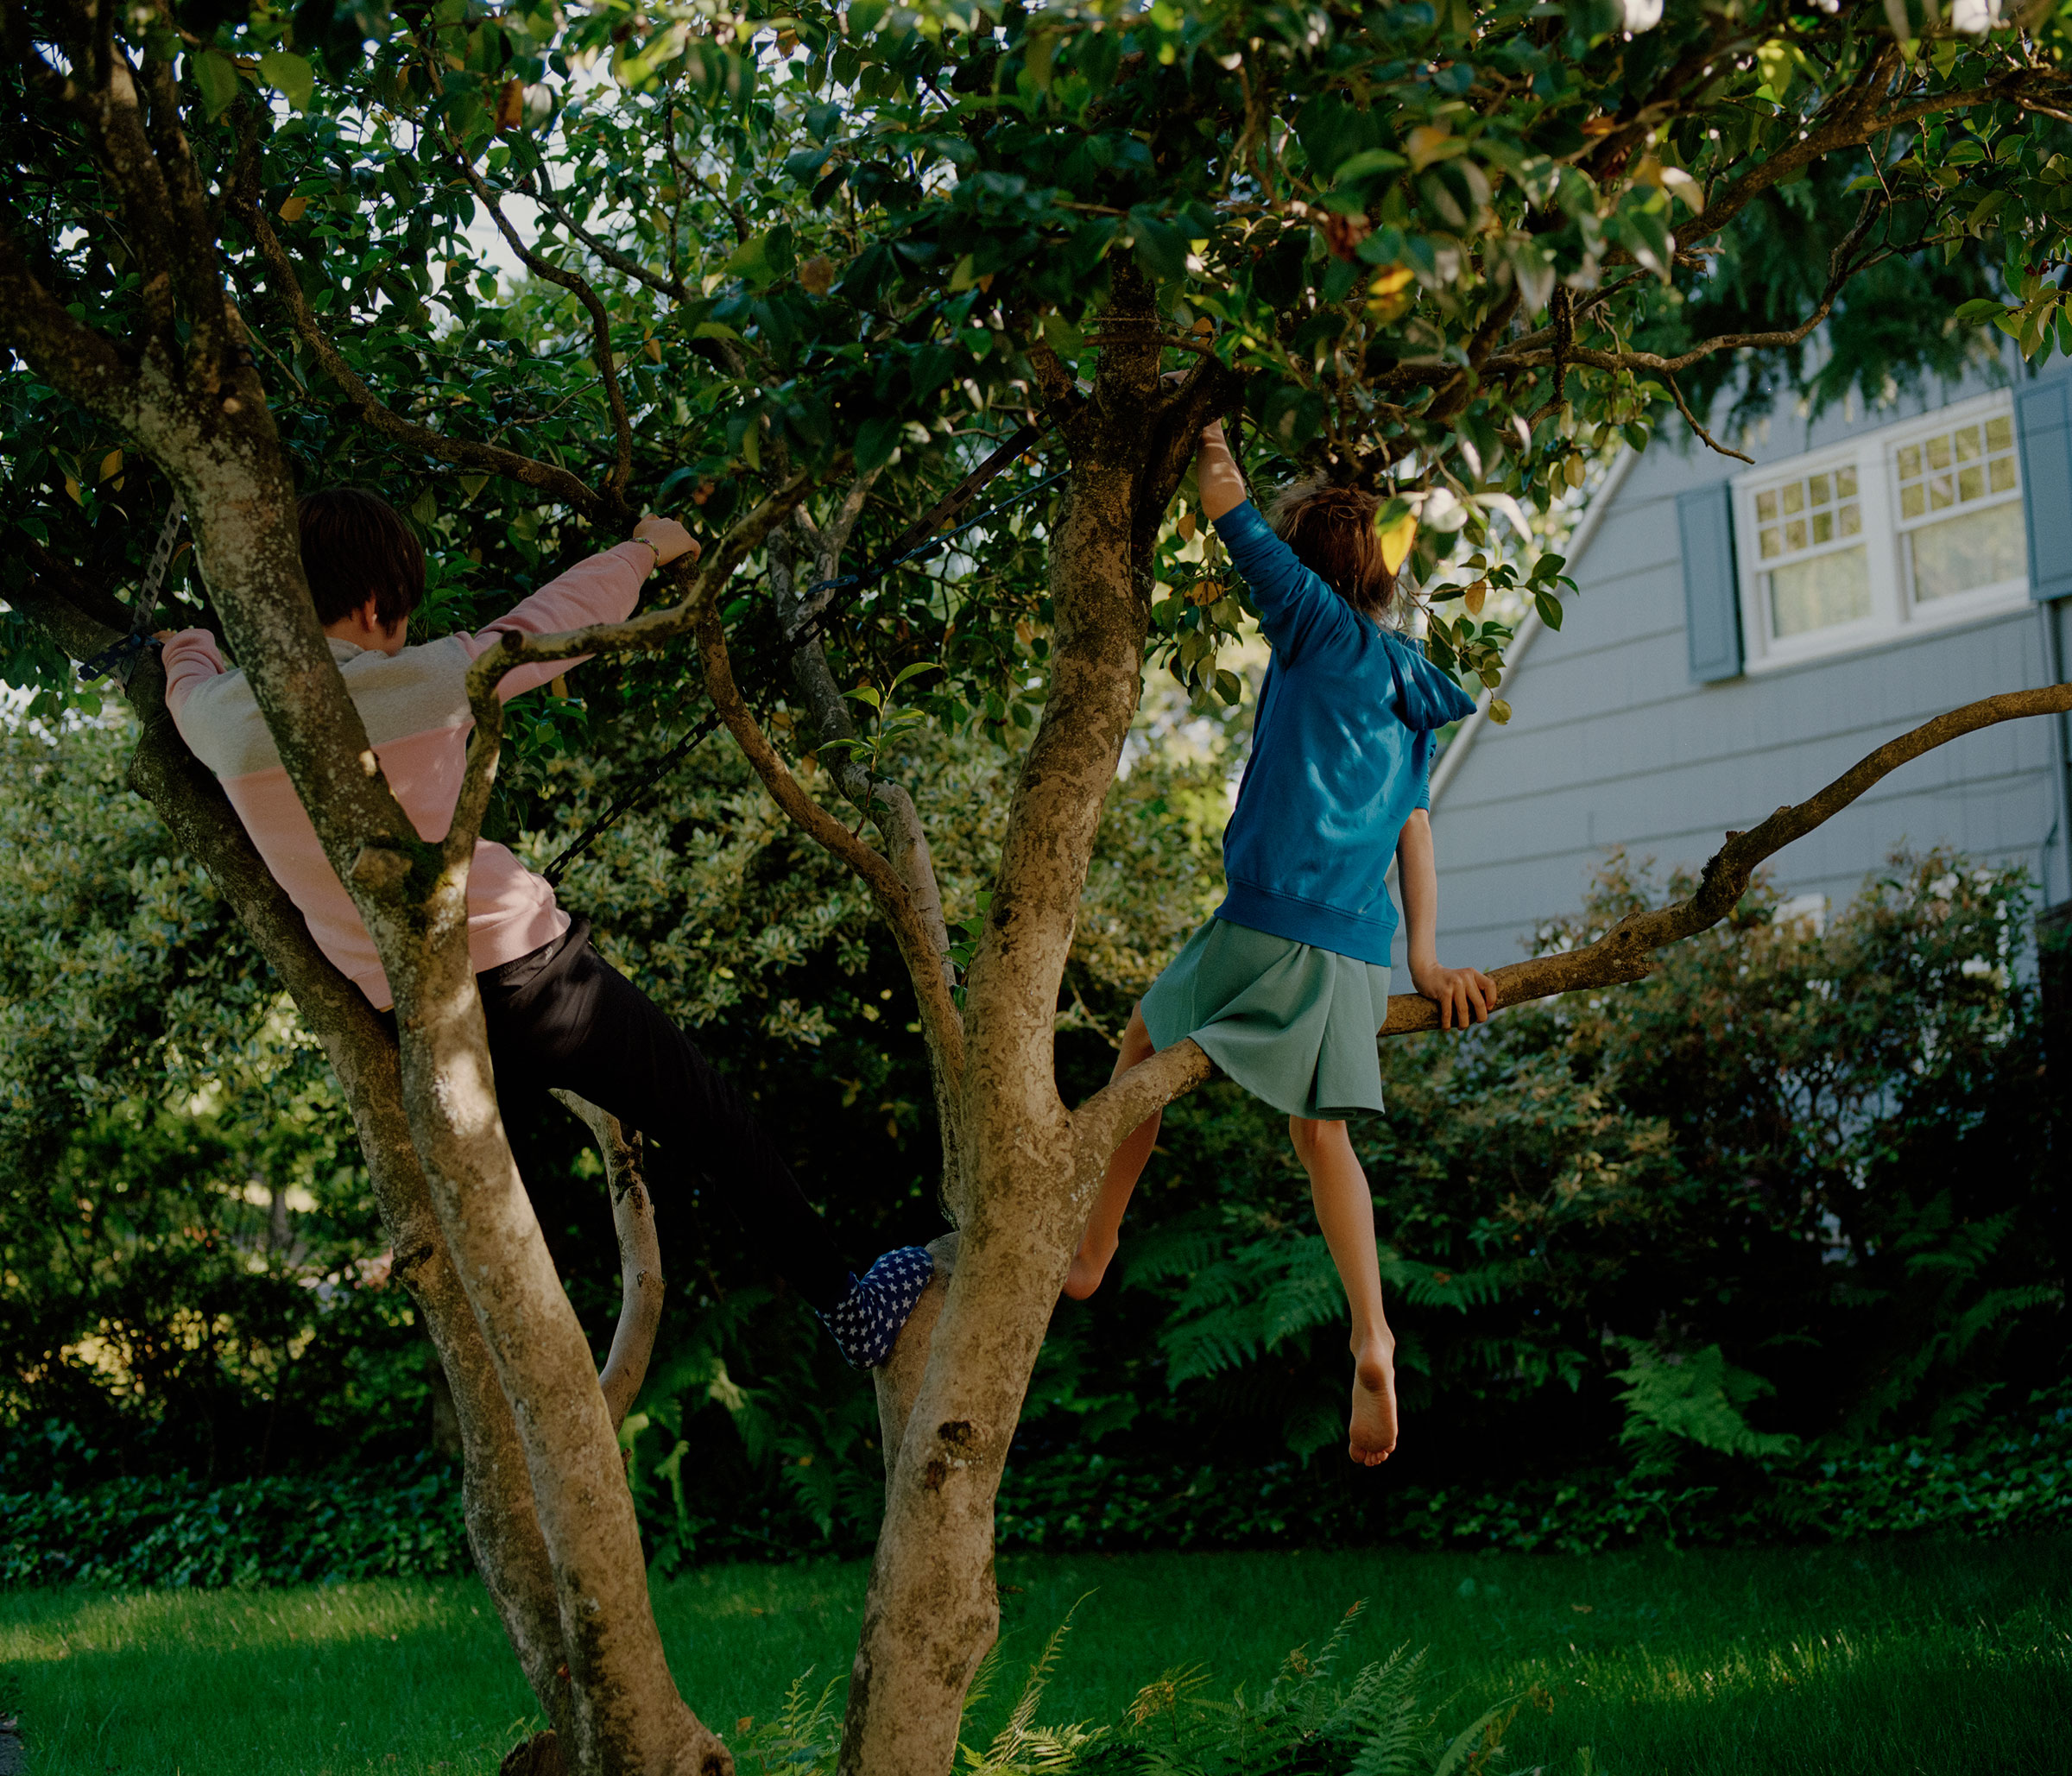 Jessie and her brother Lucas hang in a tree near their new home. (Ricardo Nagaoka for TIME)